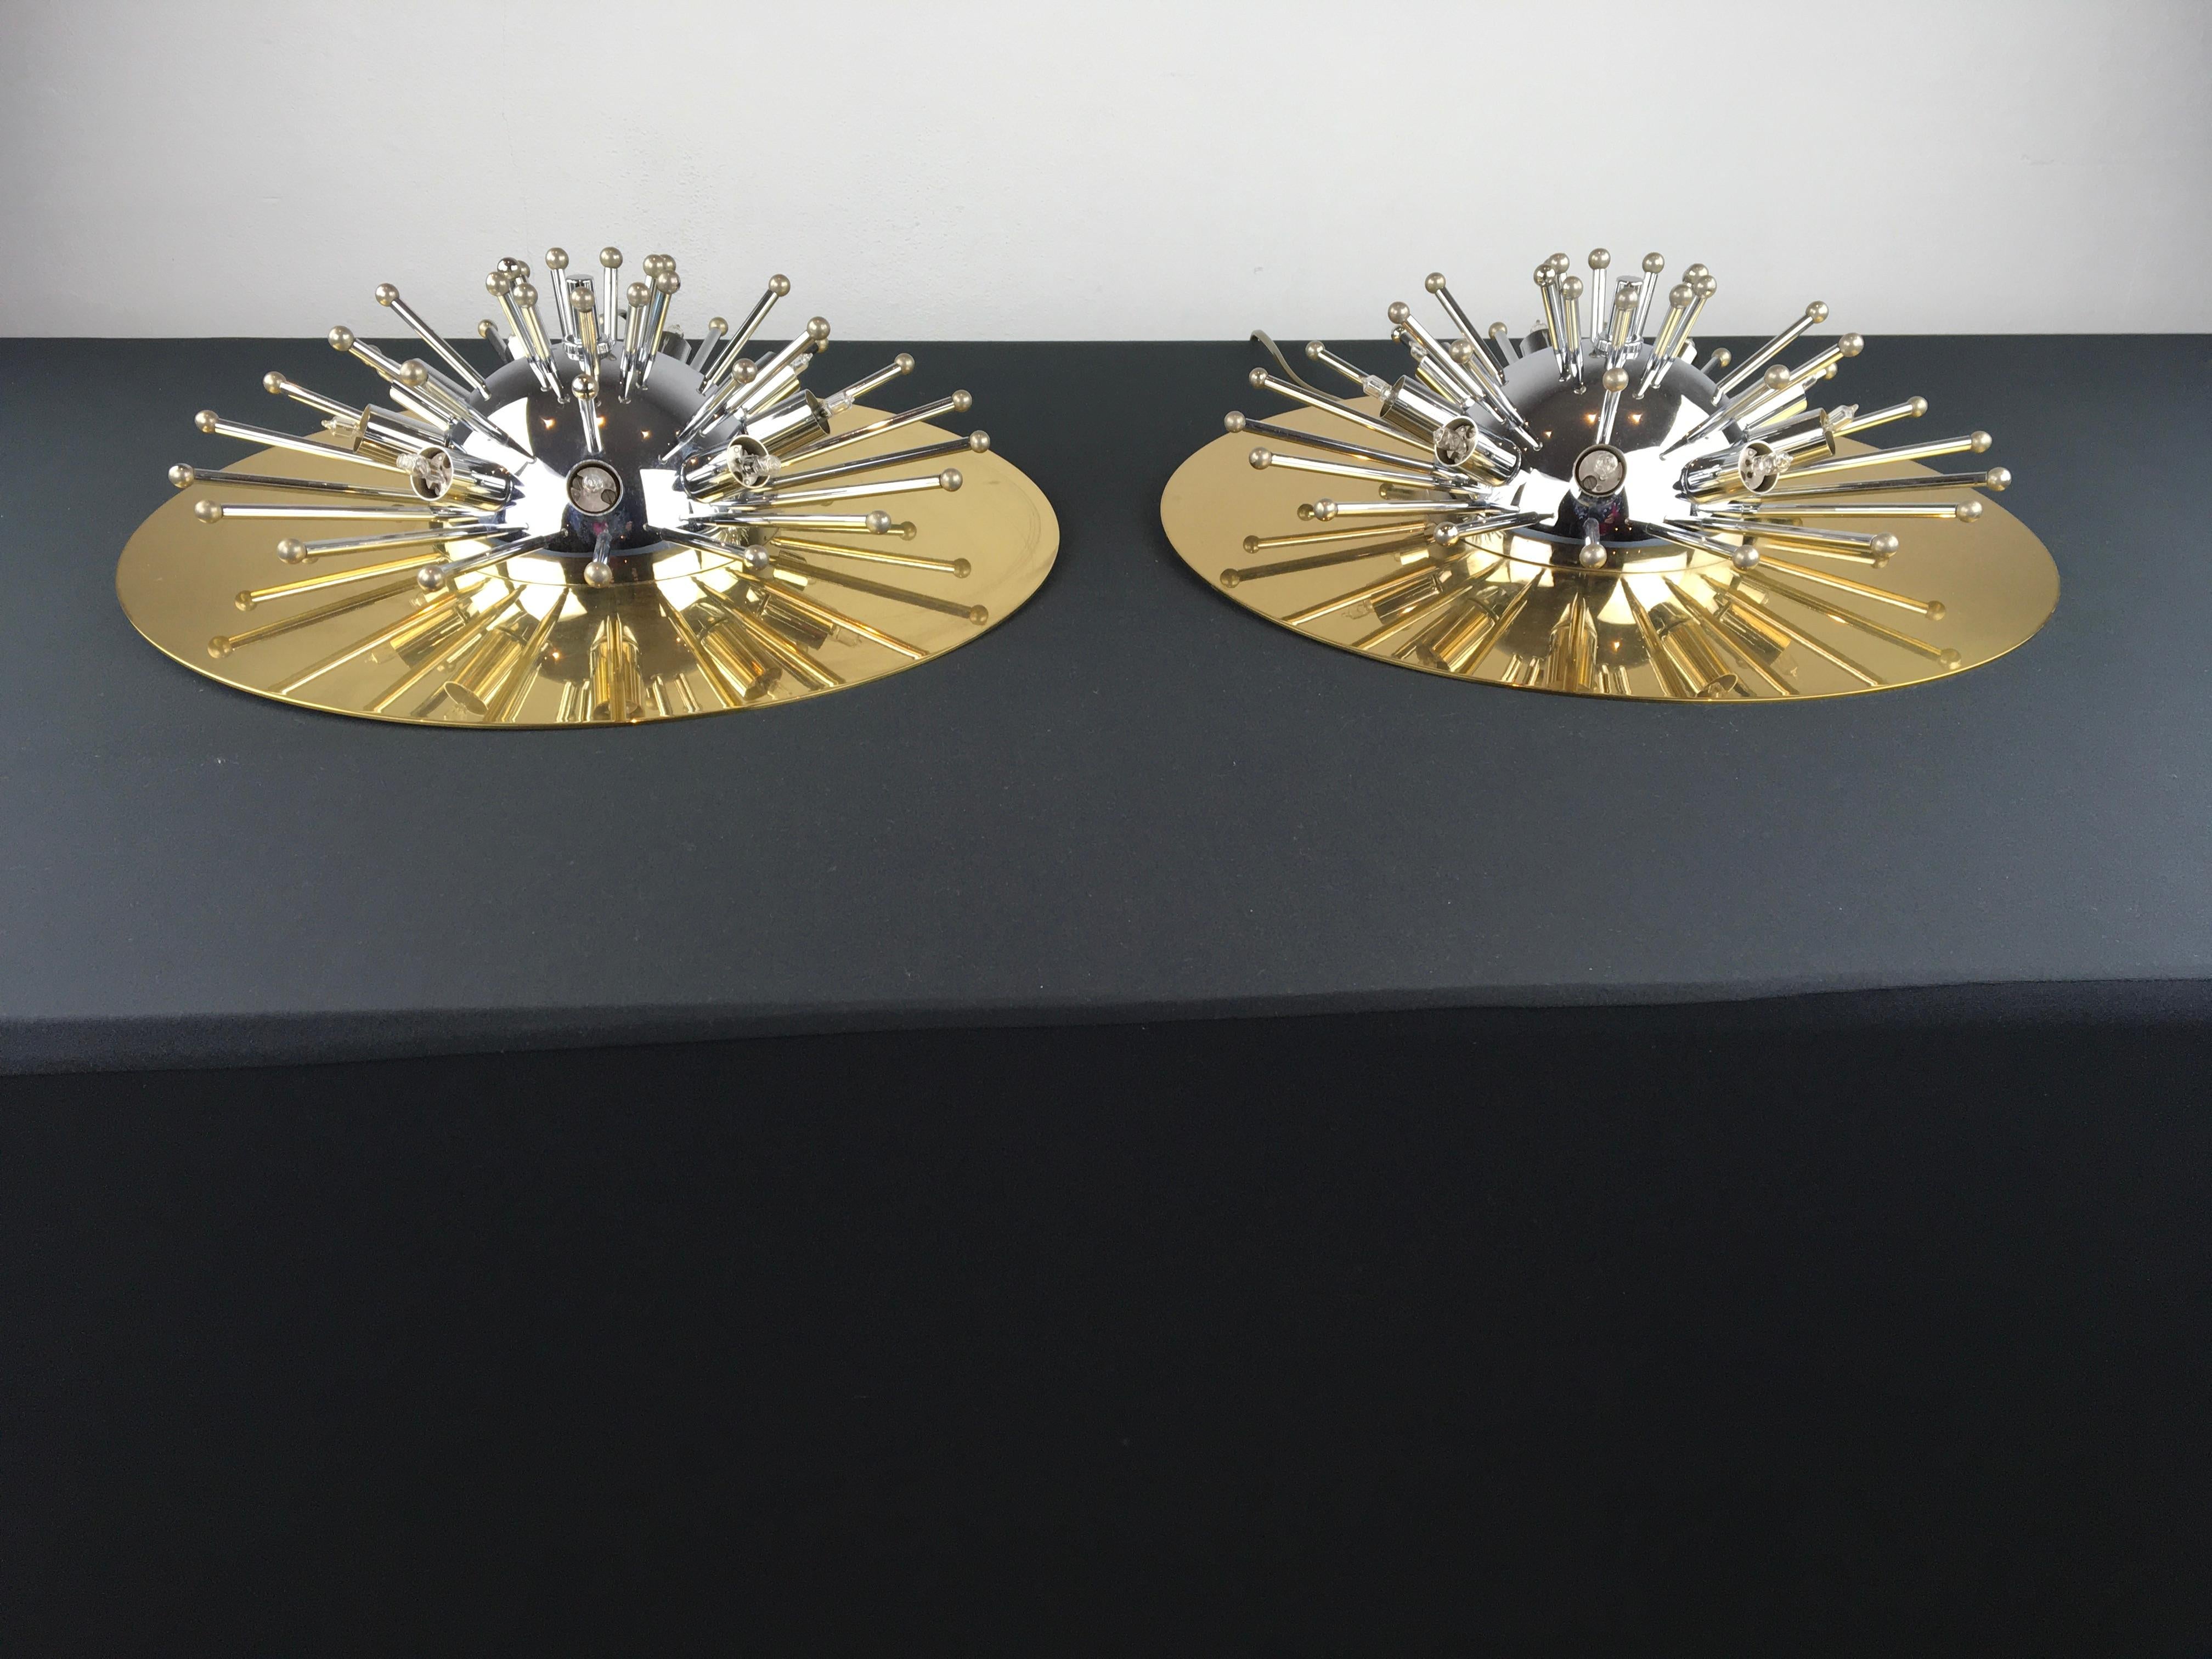 Pair of Space Age Sputnik Wall Lights or Flushmounts, Brass with Chrome, 1970s For Sale 1